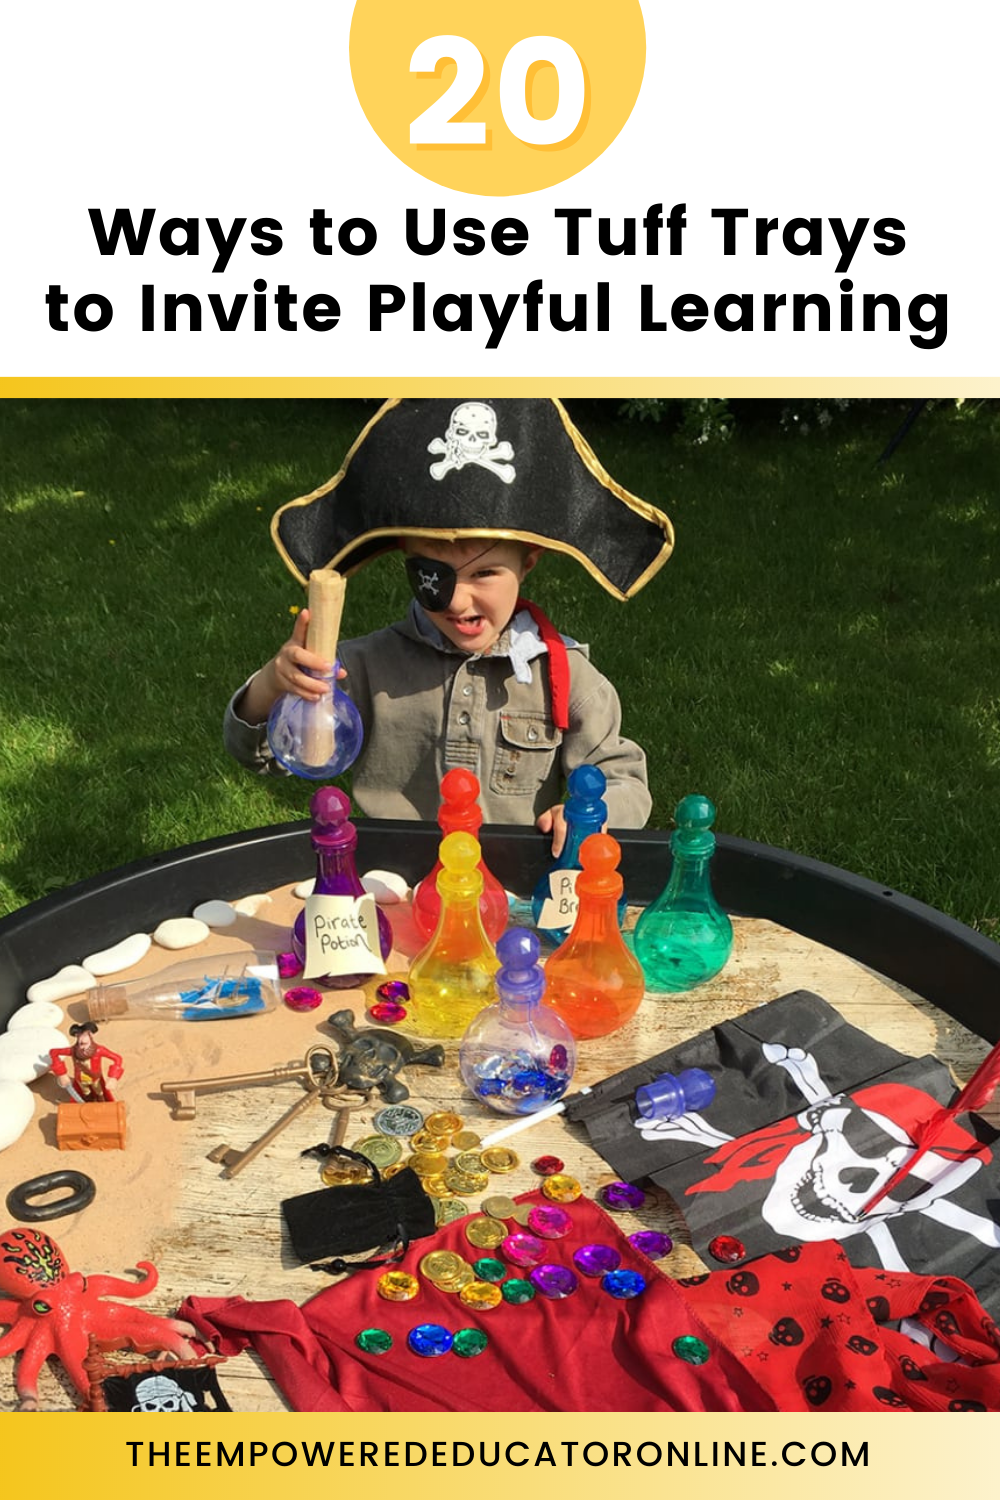 How Educators can use Tuff Trays to invite playful learning opportunities